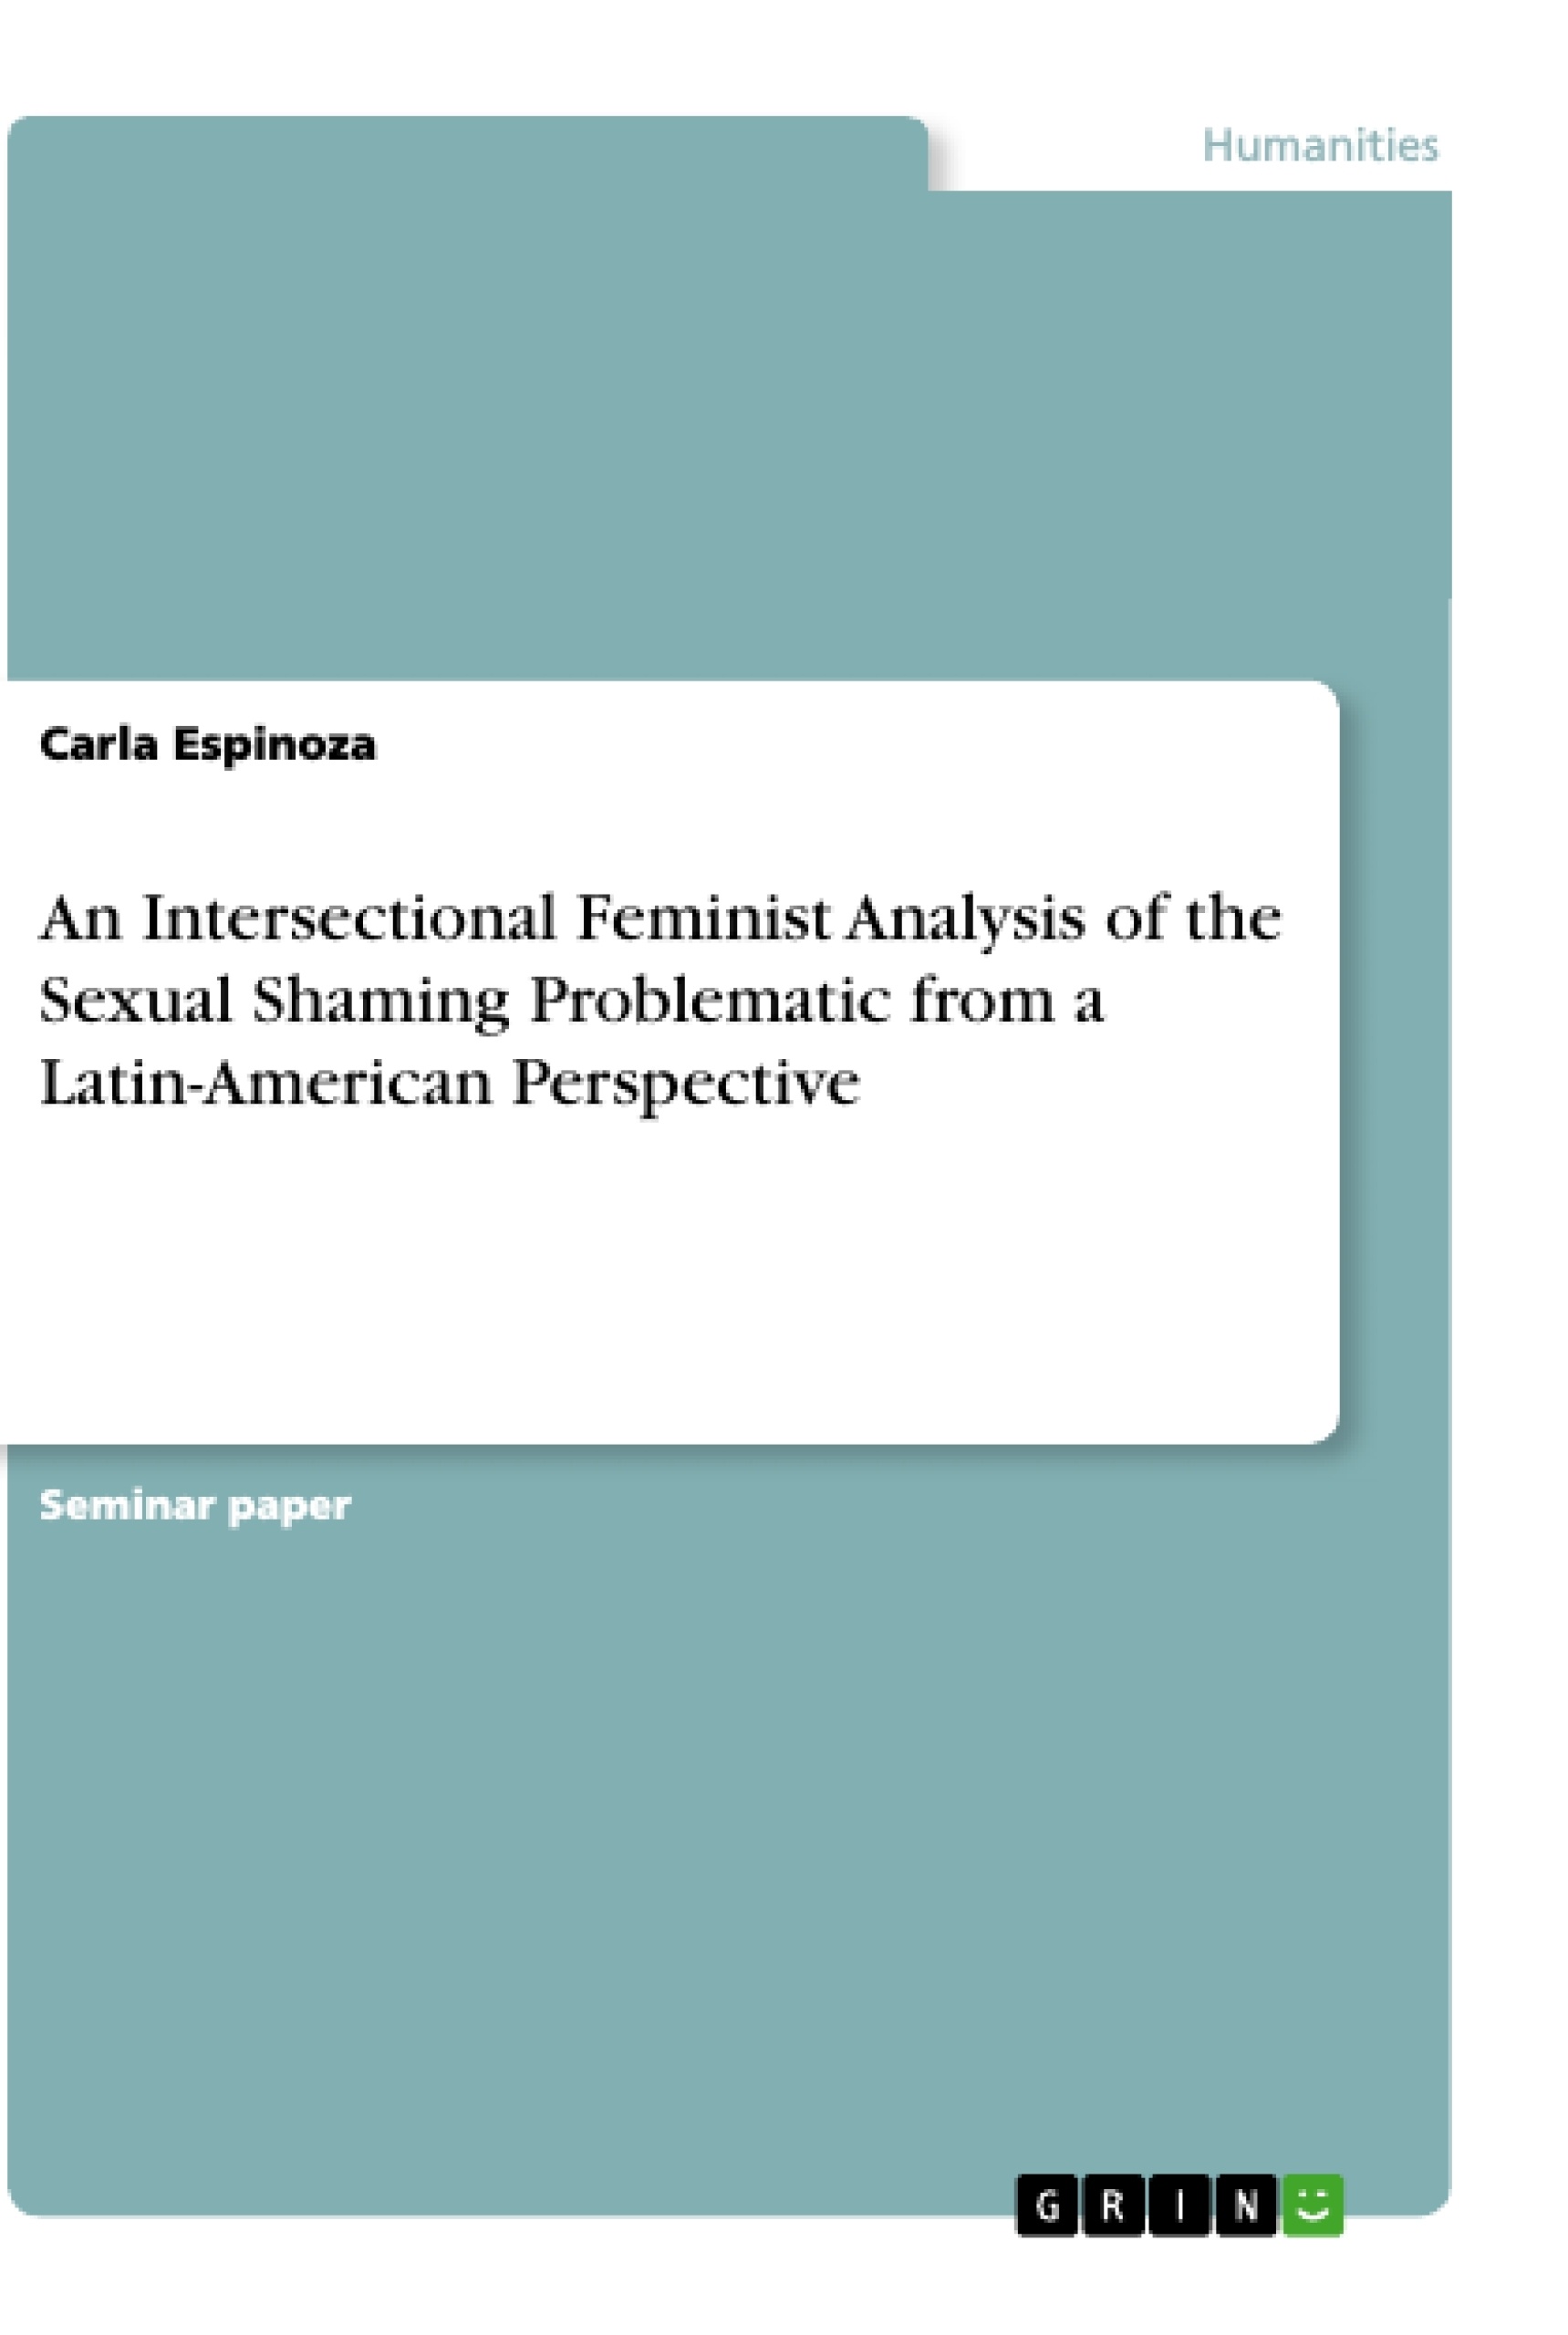 Title: An Intersectional Feminist Analysis of the Sexual Shaming Problematic from a Latin-American Perspective